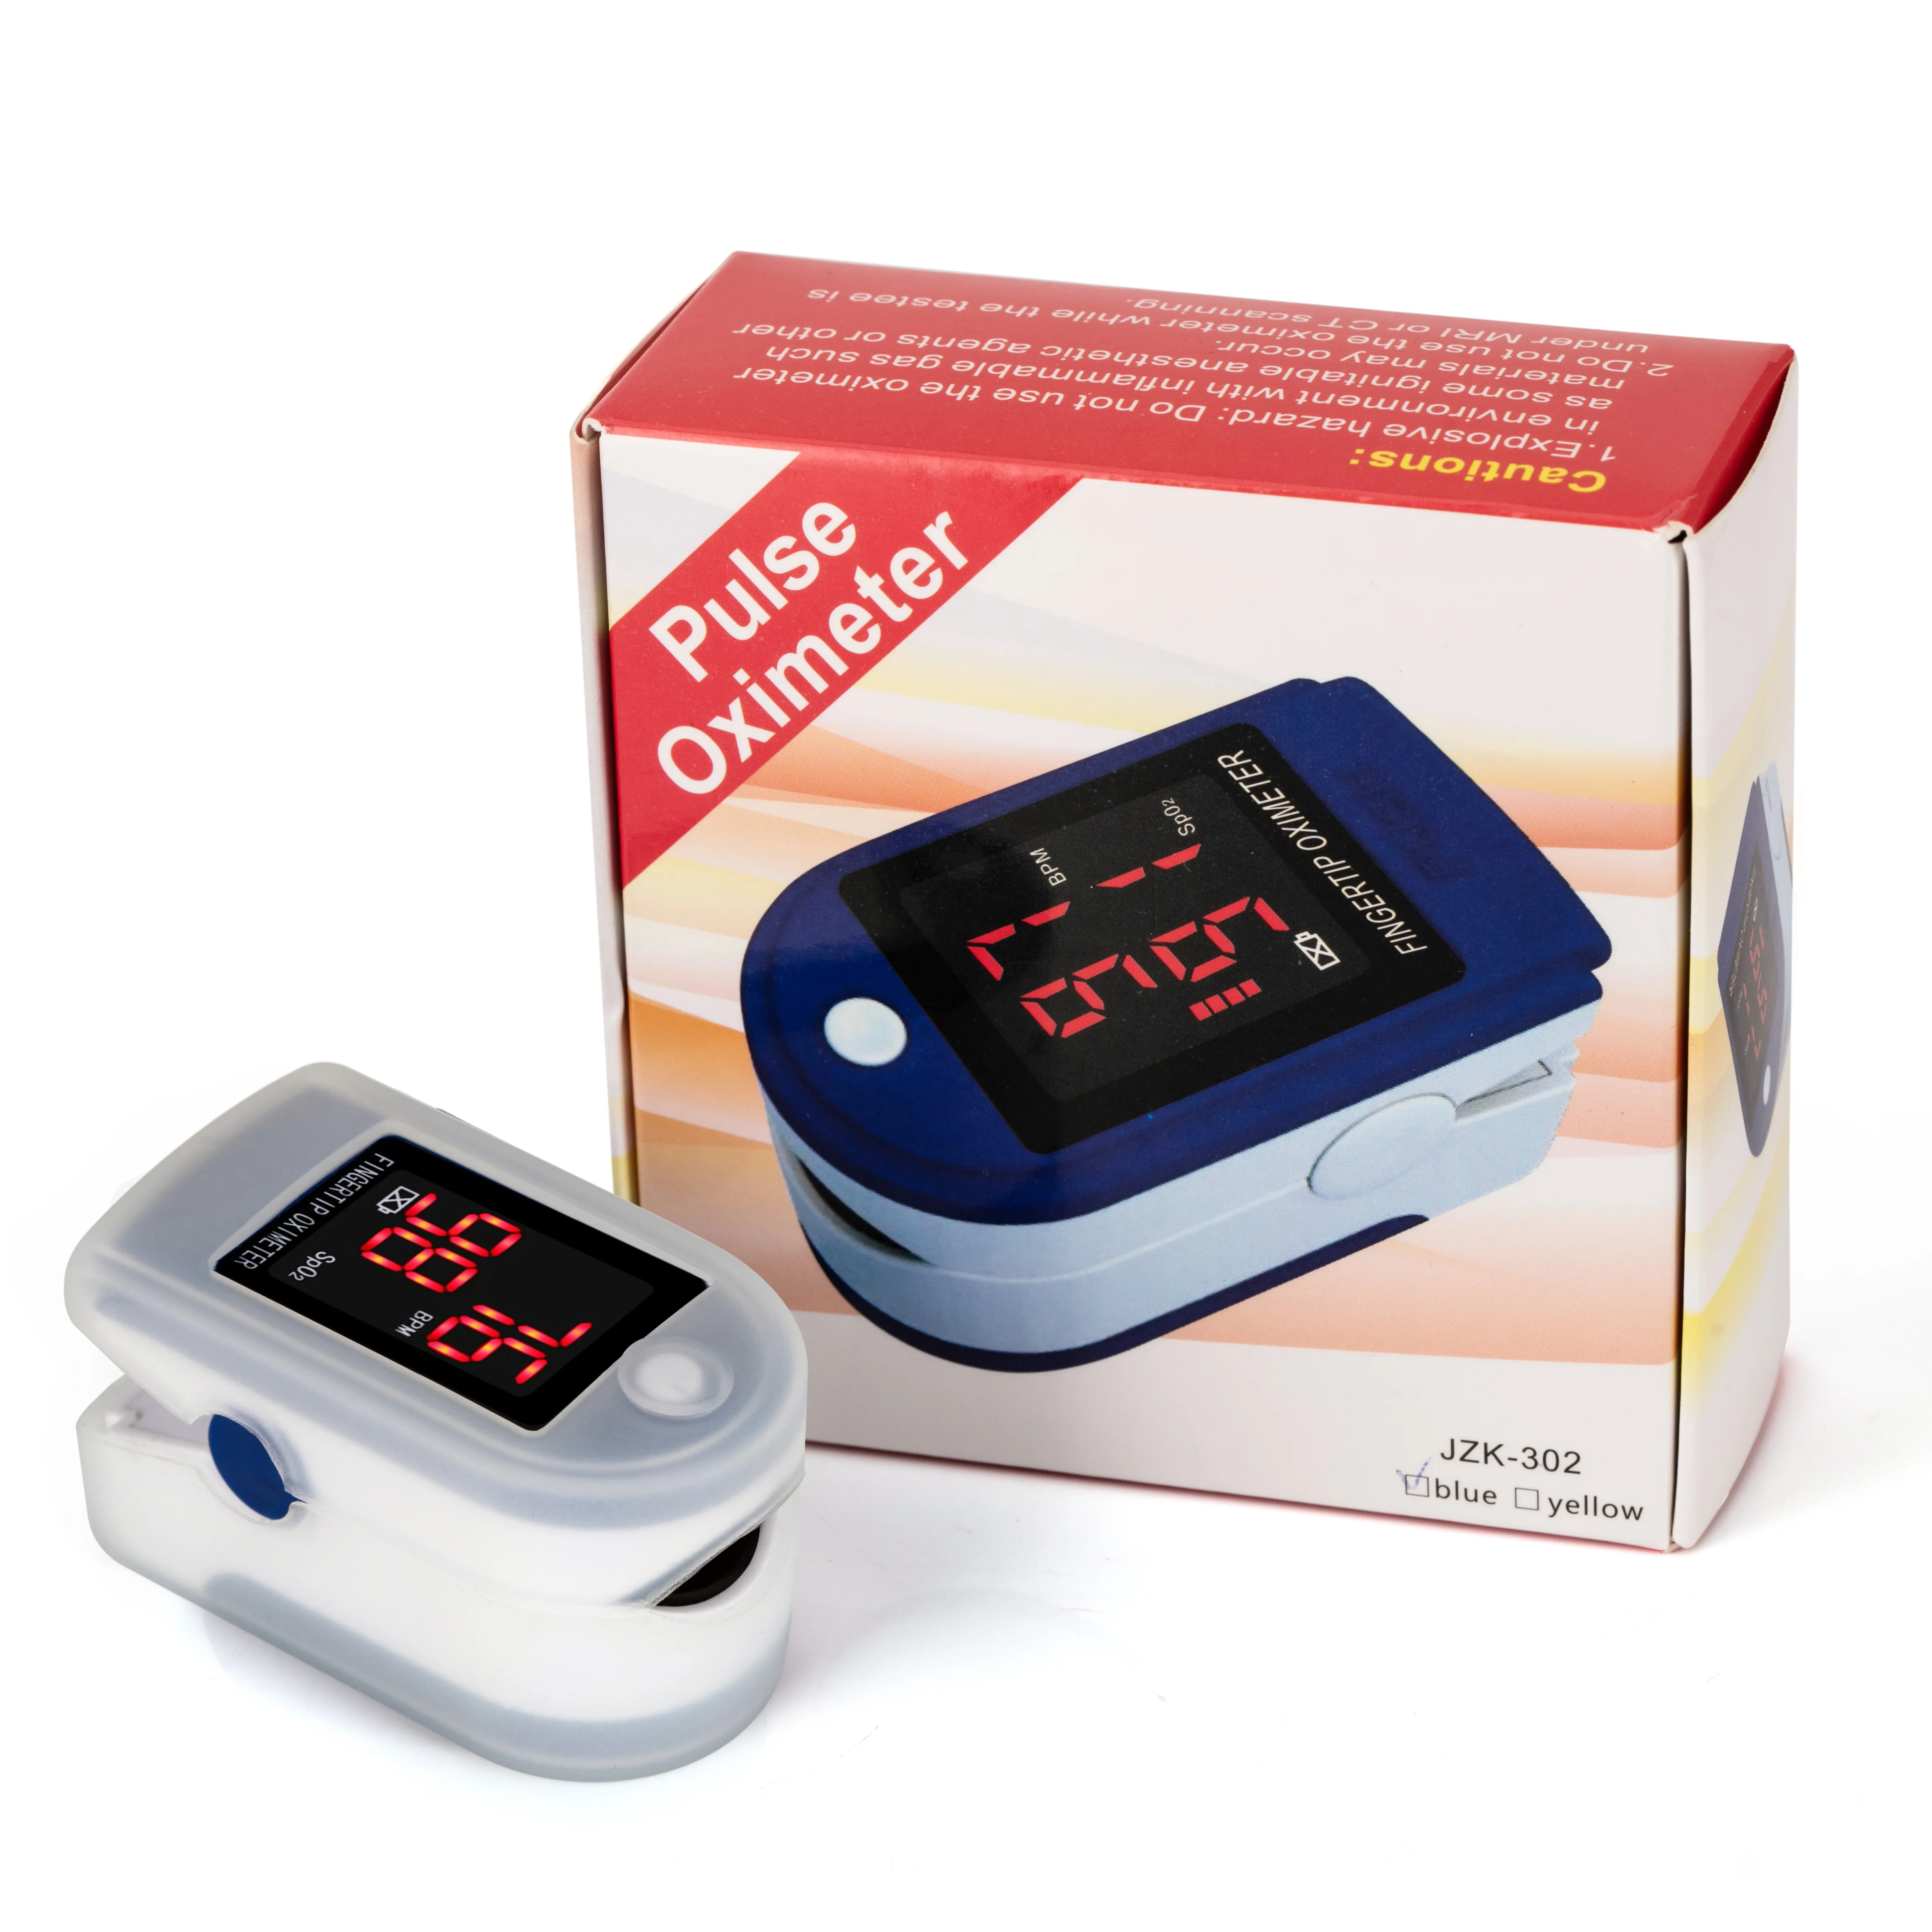 

Portable Fingertip Oximeter Monitor Blood Oxygen Saturation Pulsoximeter Heart Rate Spo2 Pulse Oximeter without Batteries